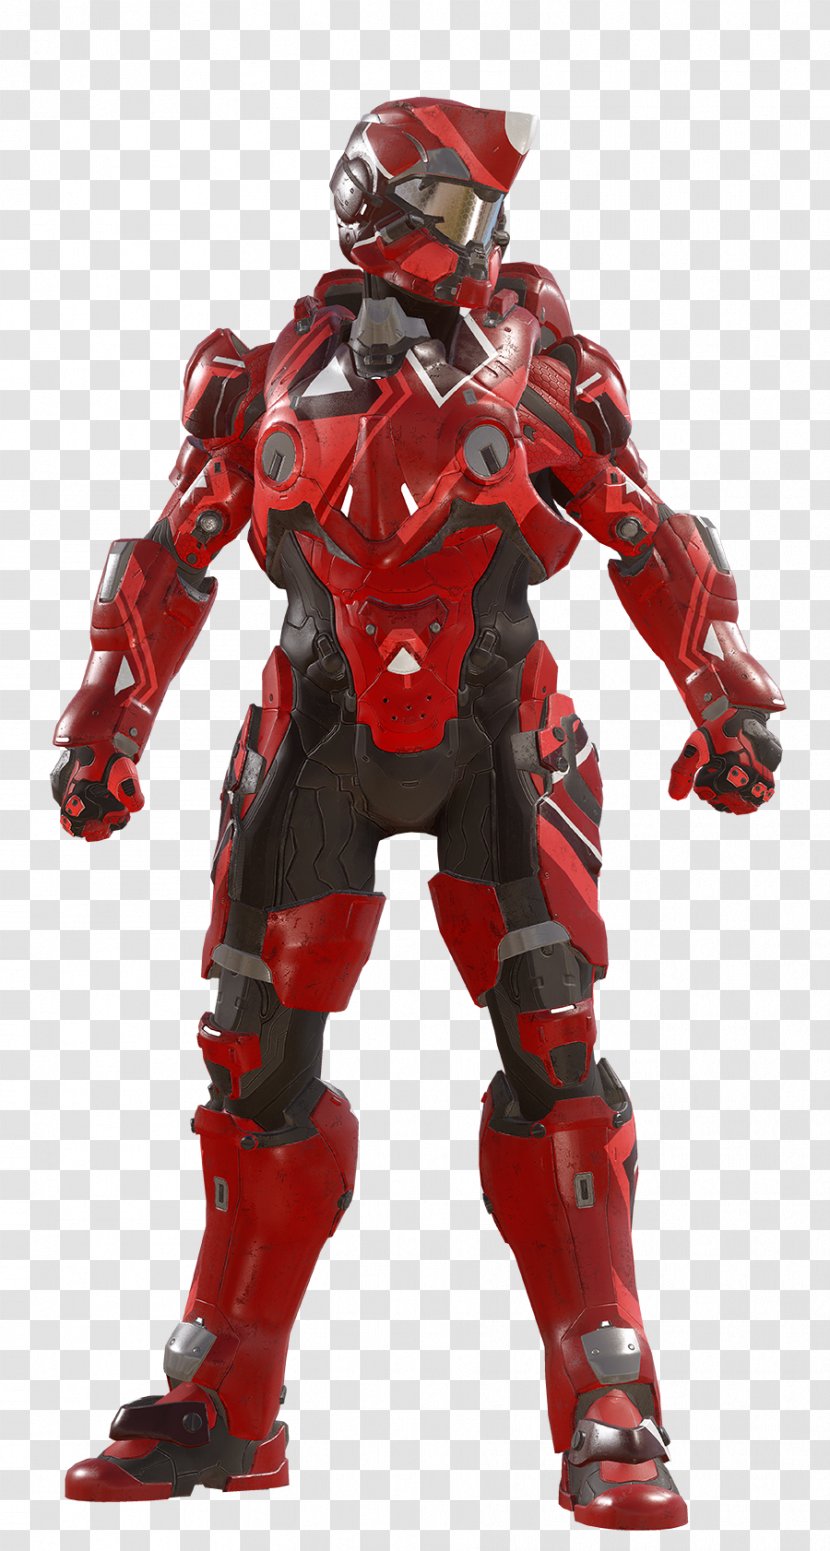 Halo 5: Guardians Halo: Combat Evolved Anniversary Reach 4 - Toy - Wars Transparent PNG